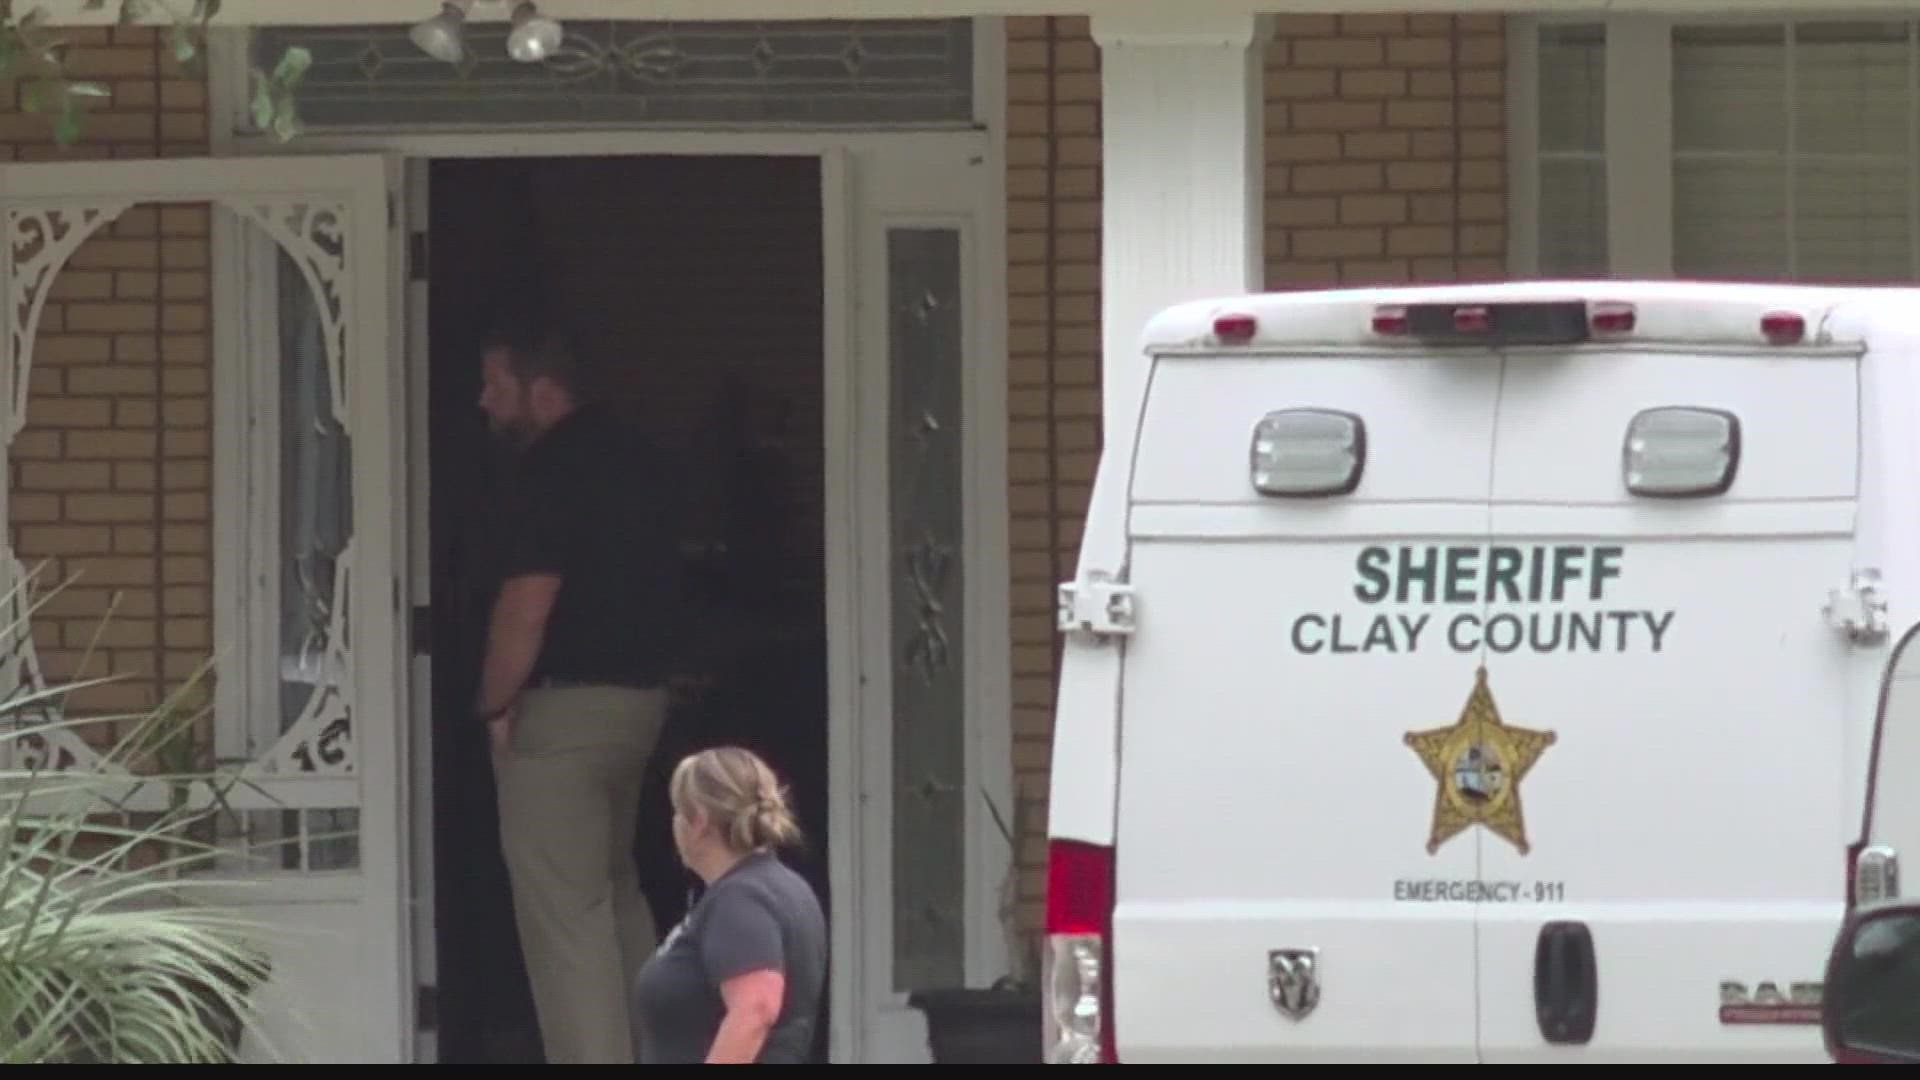 Two men were found in a home, victims of an "execution style murder."